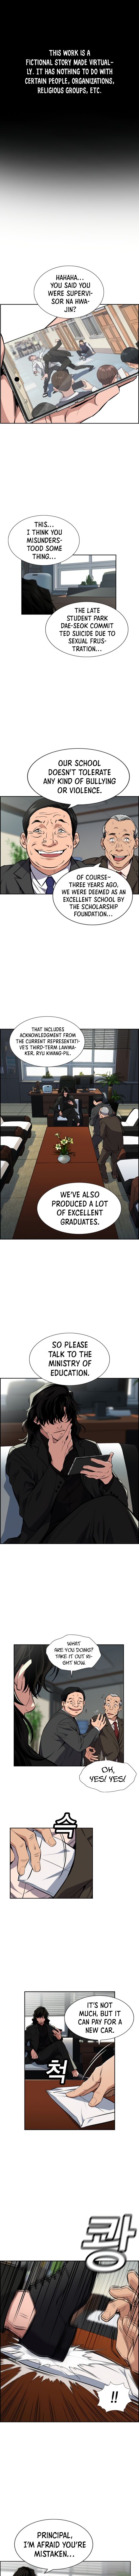 True Education - Page 2